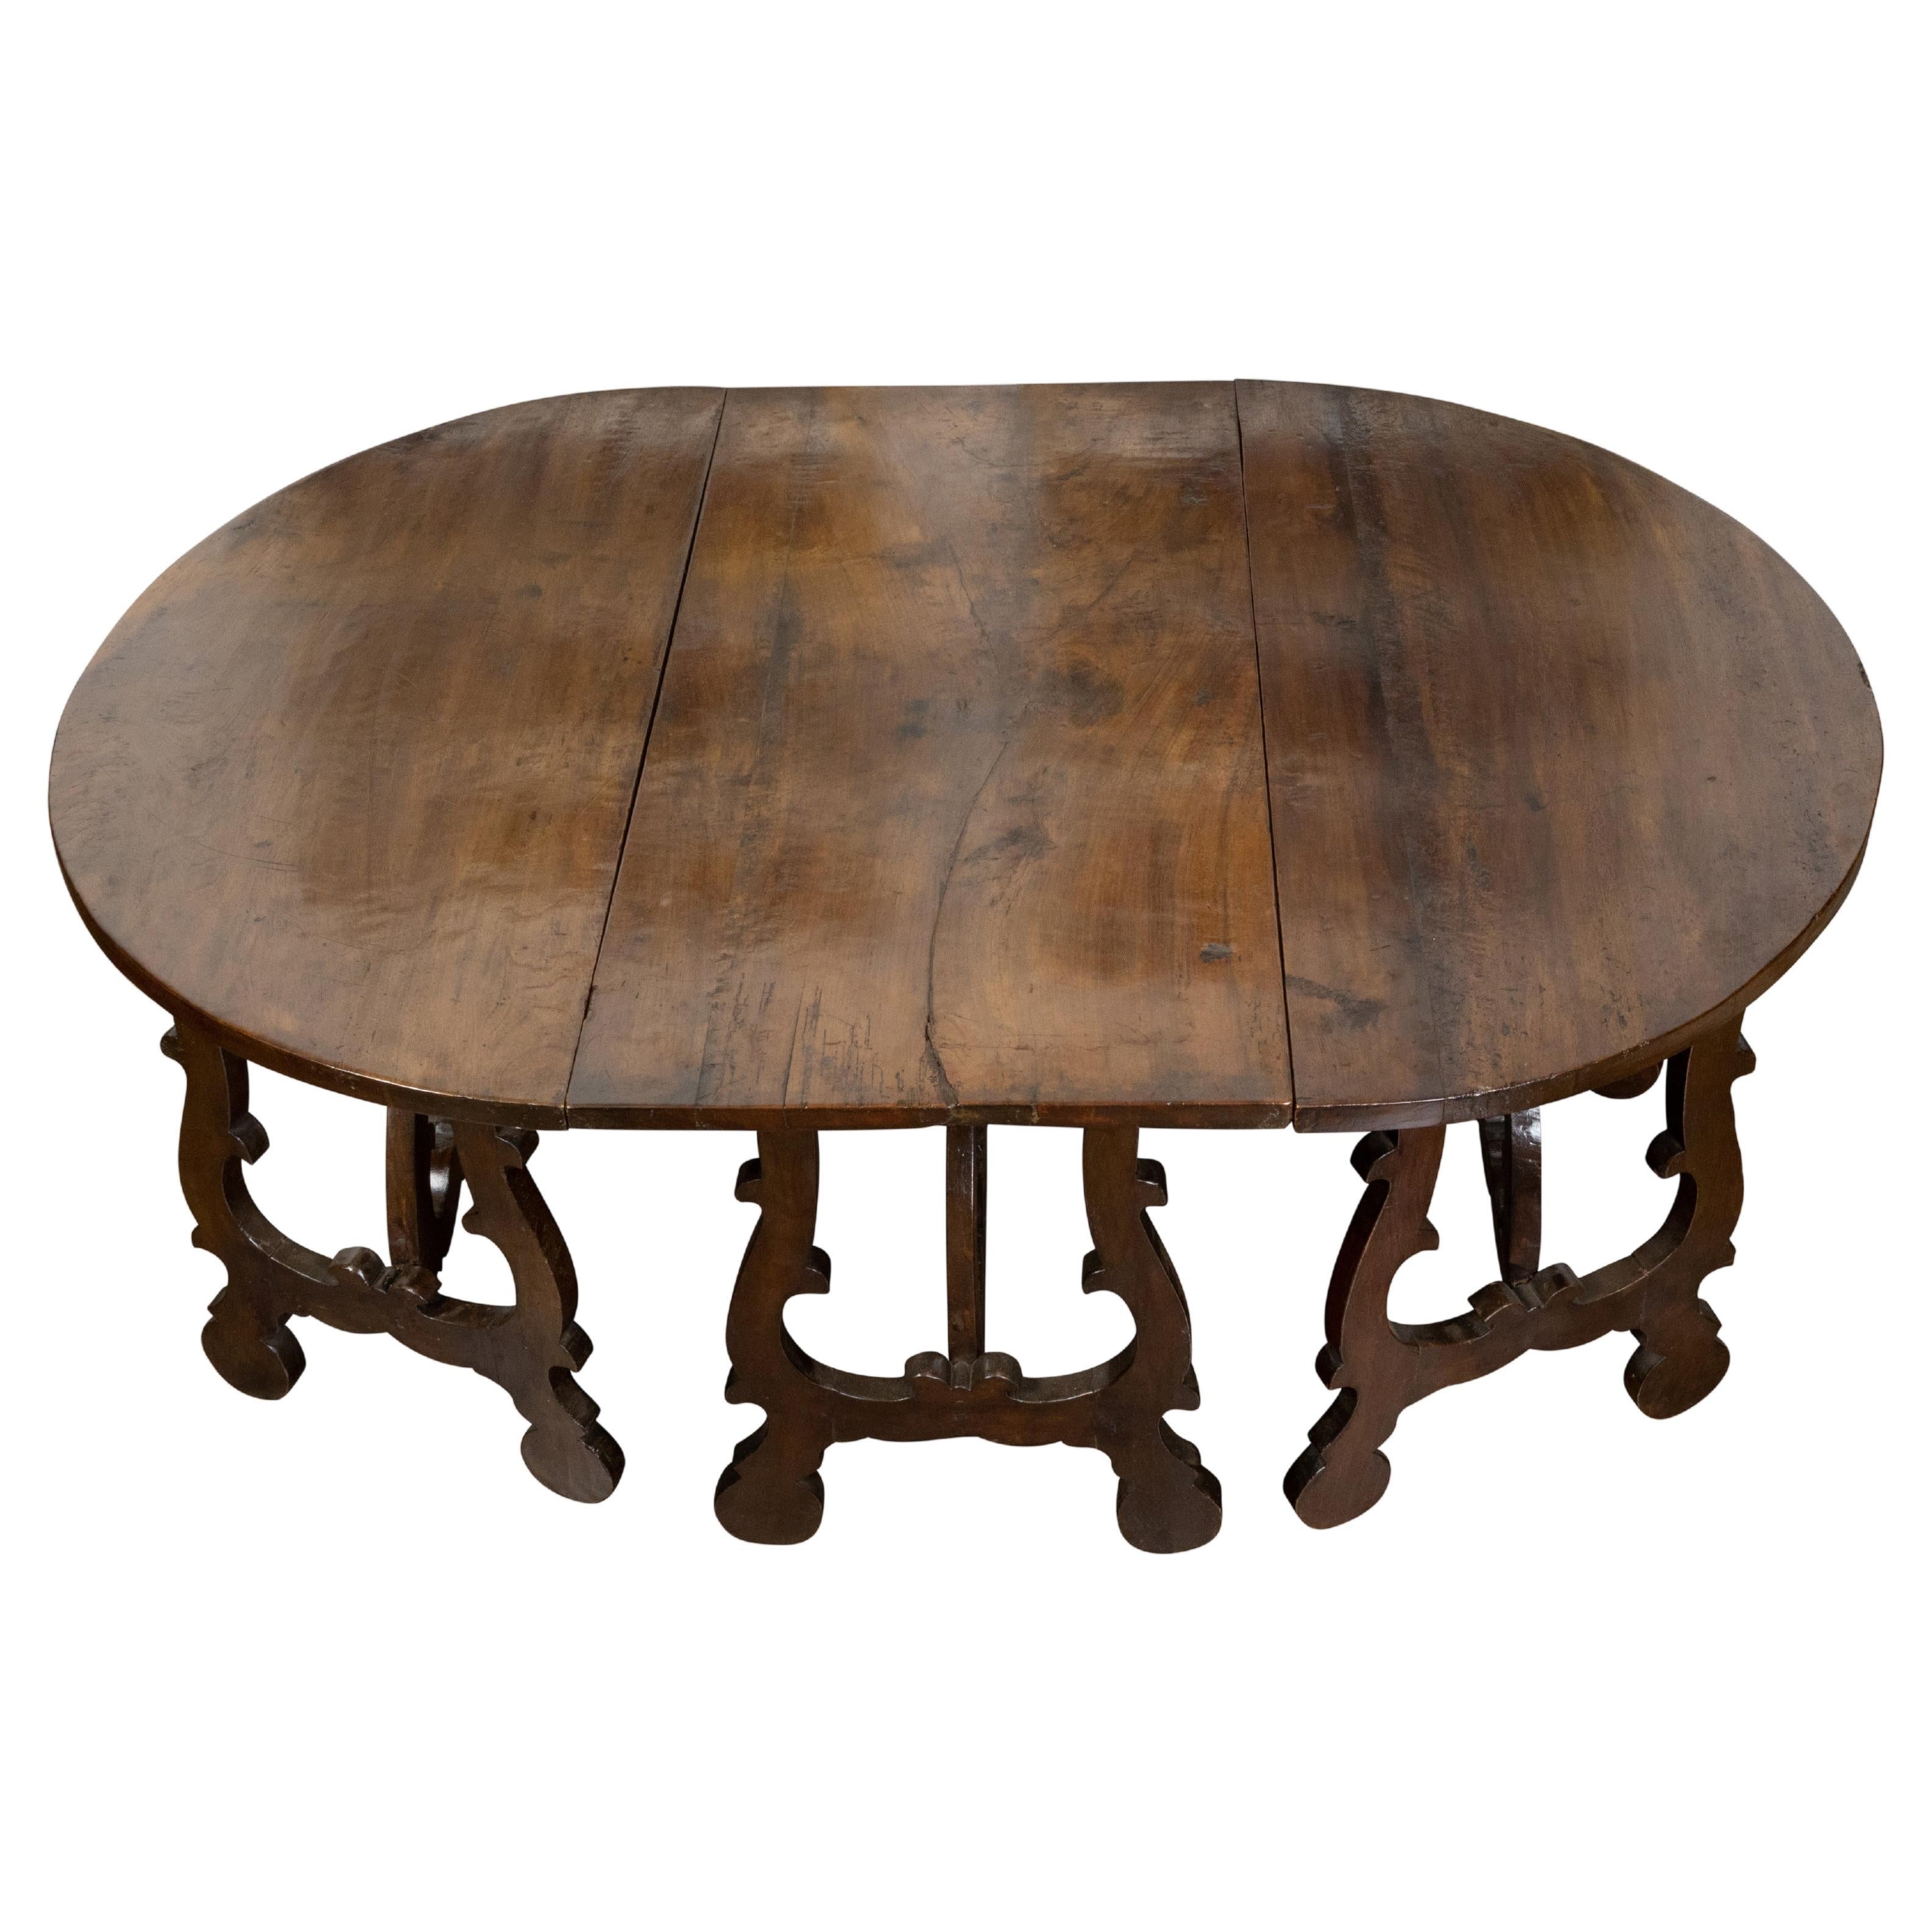 Three-Piece Italian Baroque Style Oval Top Table with Carved Lyre Shaped Legs For Sale